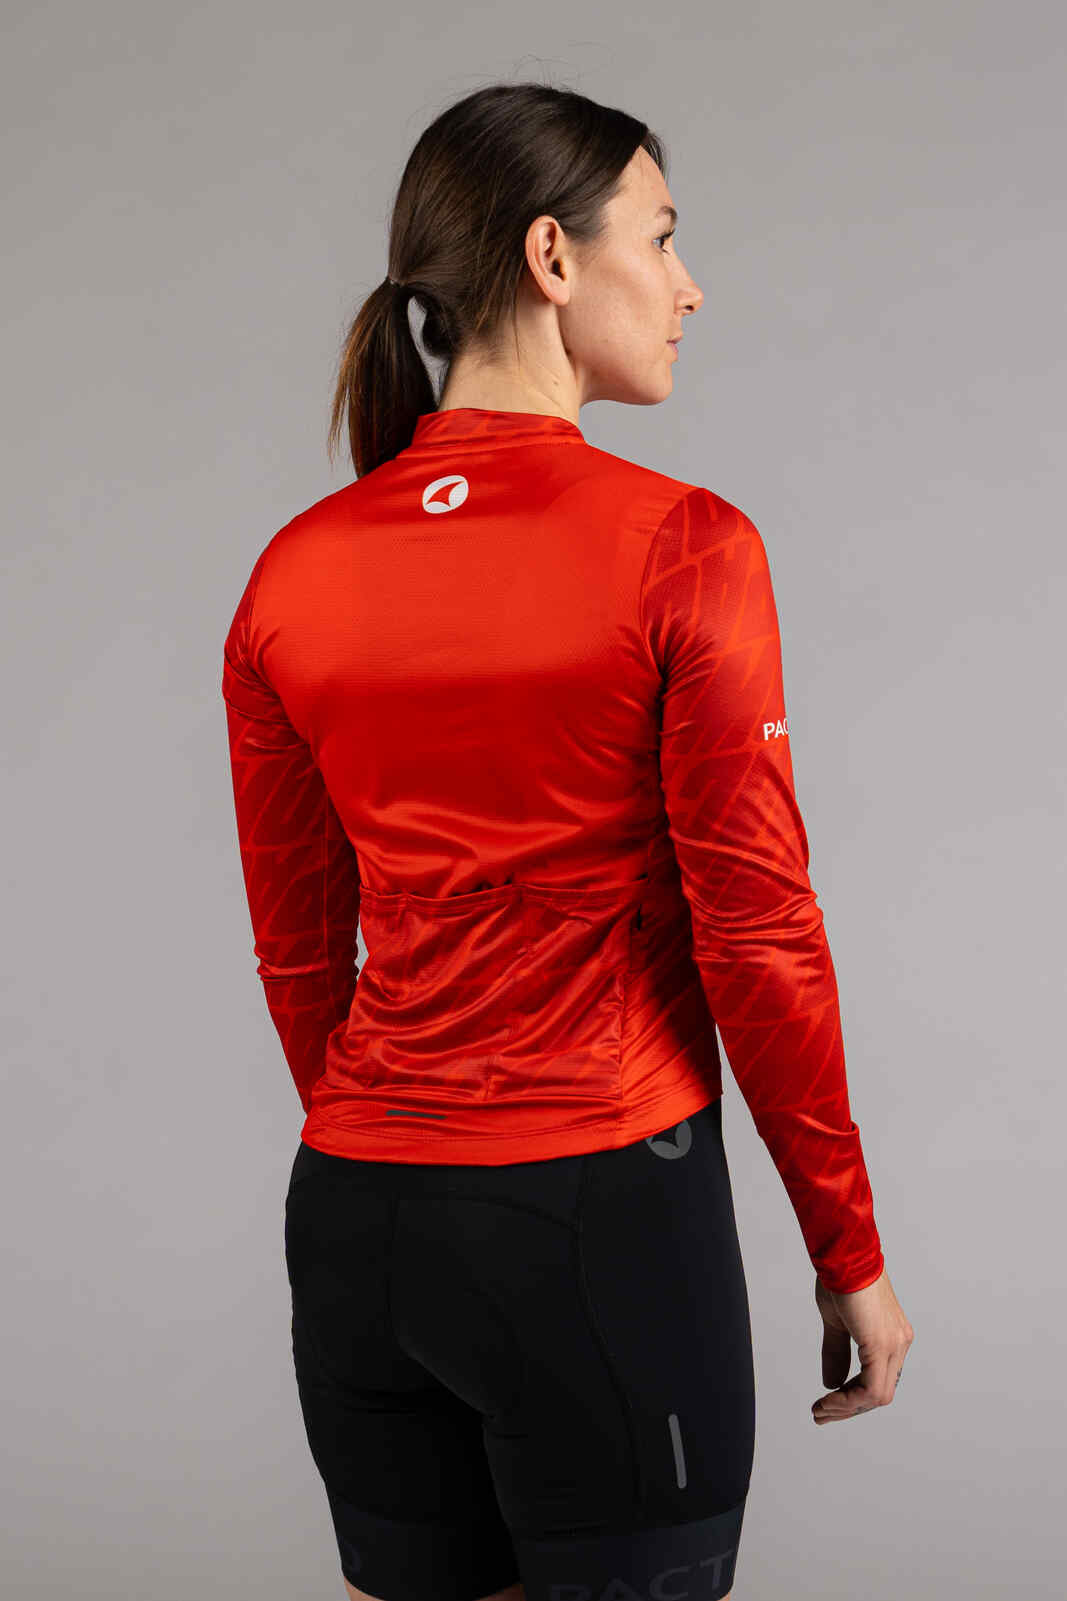 Women's Long Sleeve Red Cycling Jersey - Back View